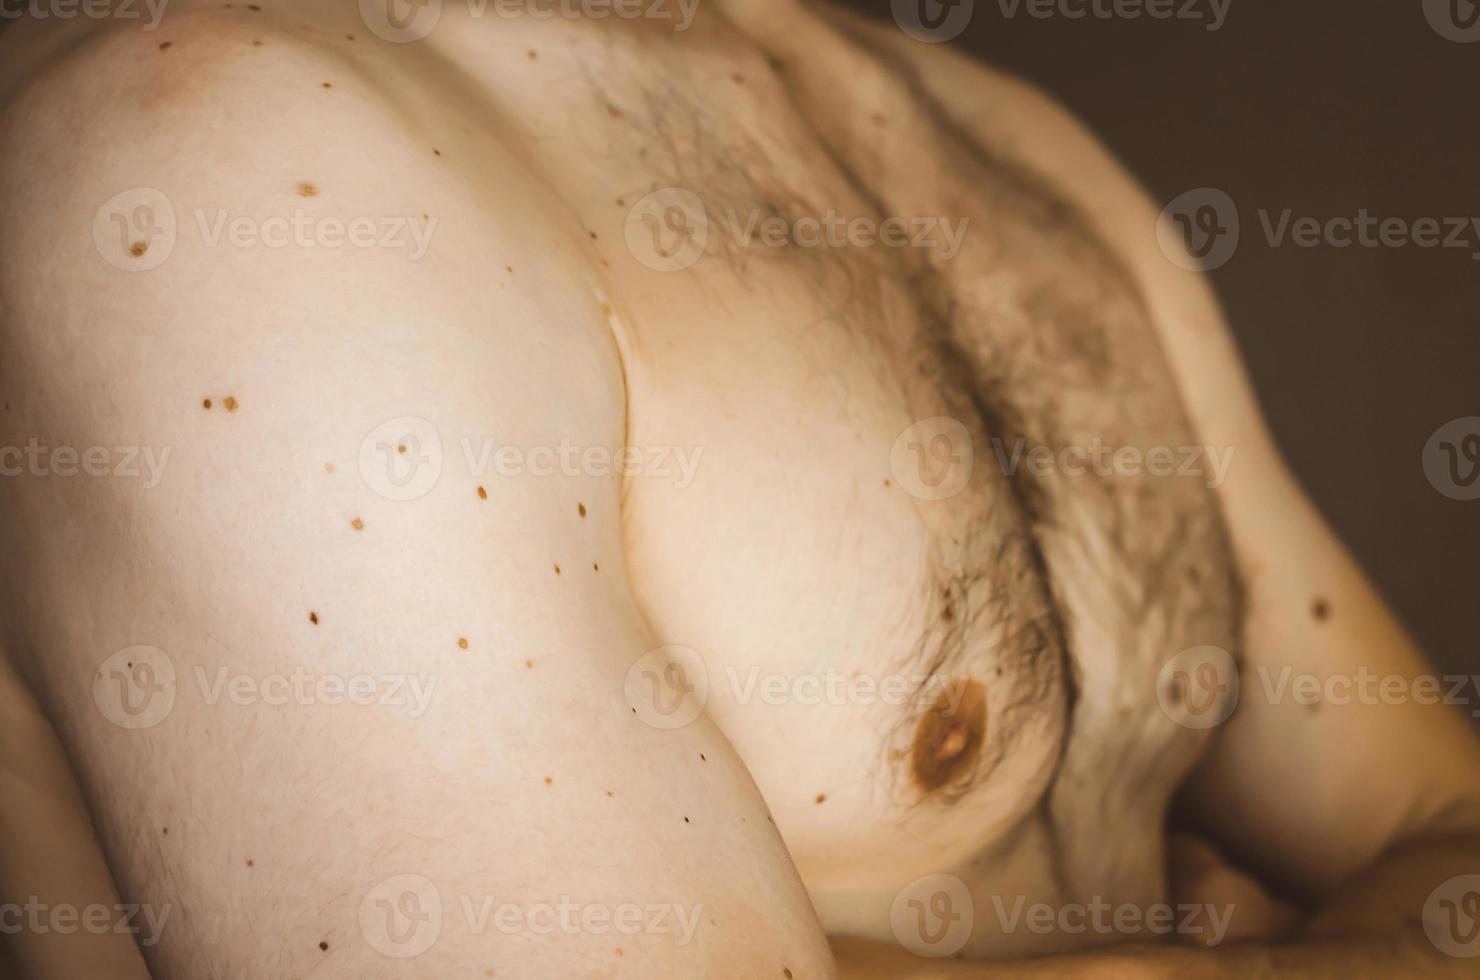 Moles on the chest of a man. photo